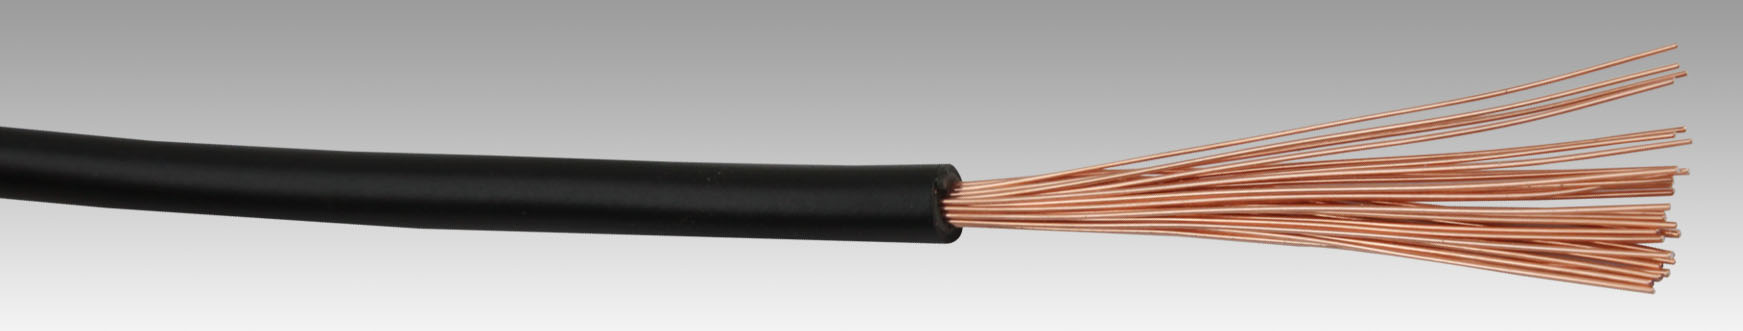 UL Electric cable